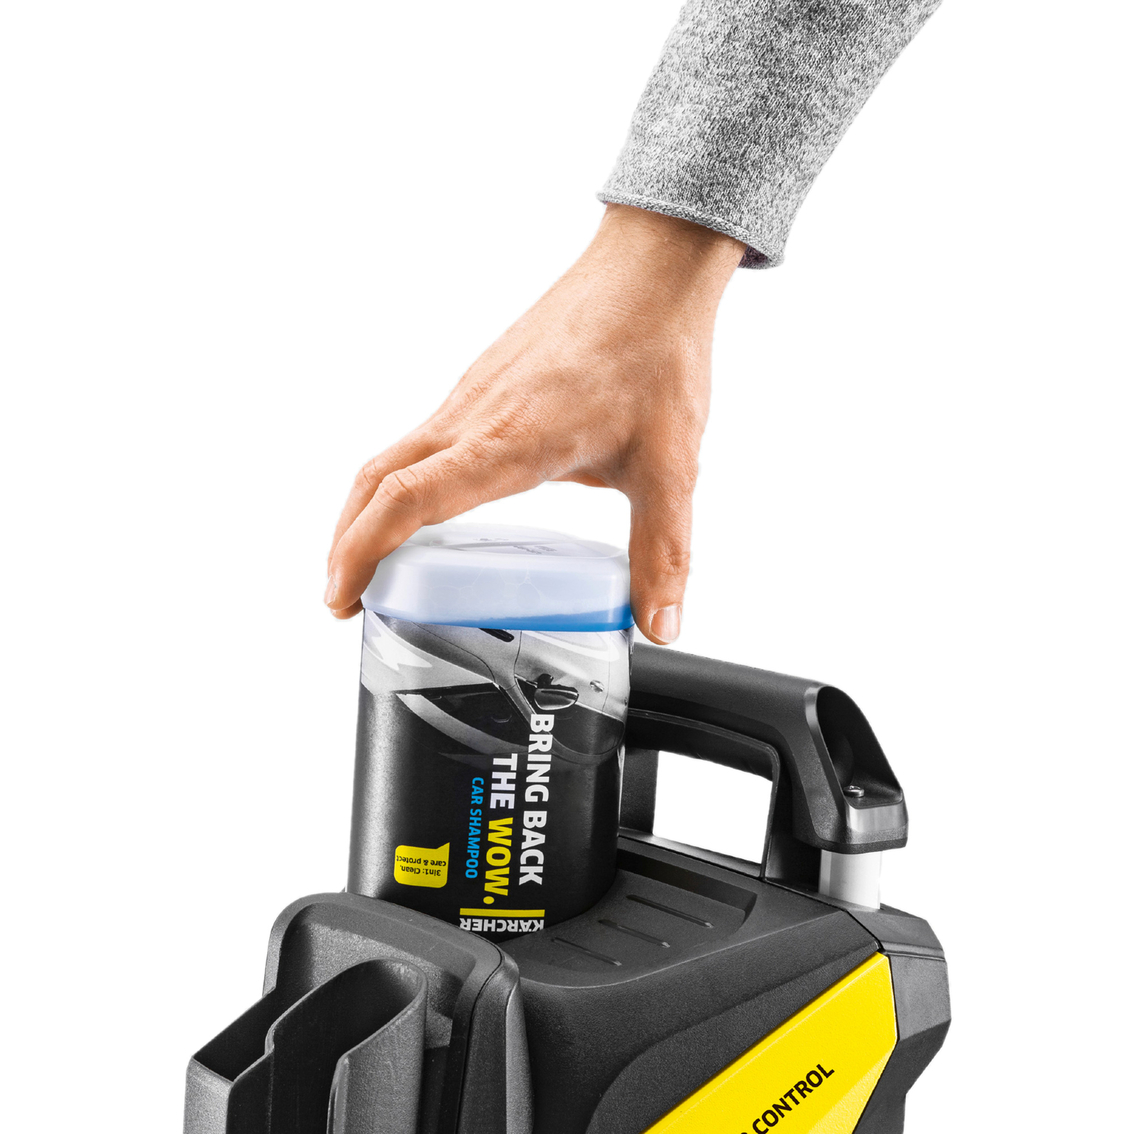 Karcher K5 Power Control 2000 PSI Electric Pressure Washer - Image 7 of 10